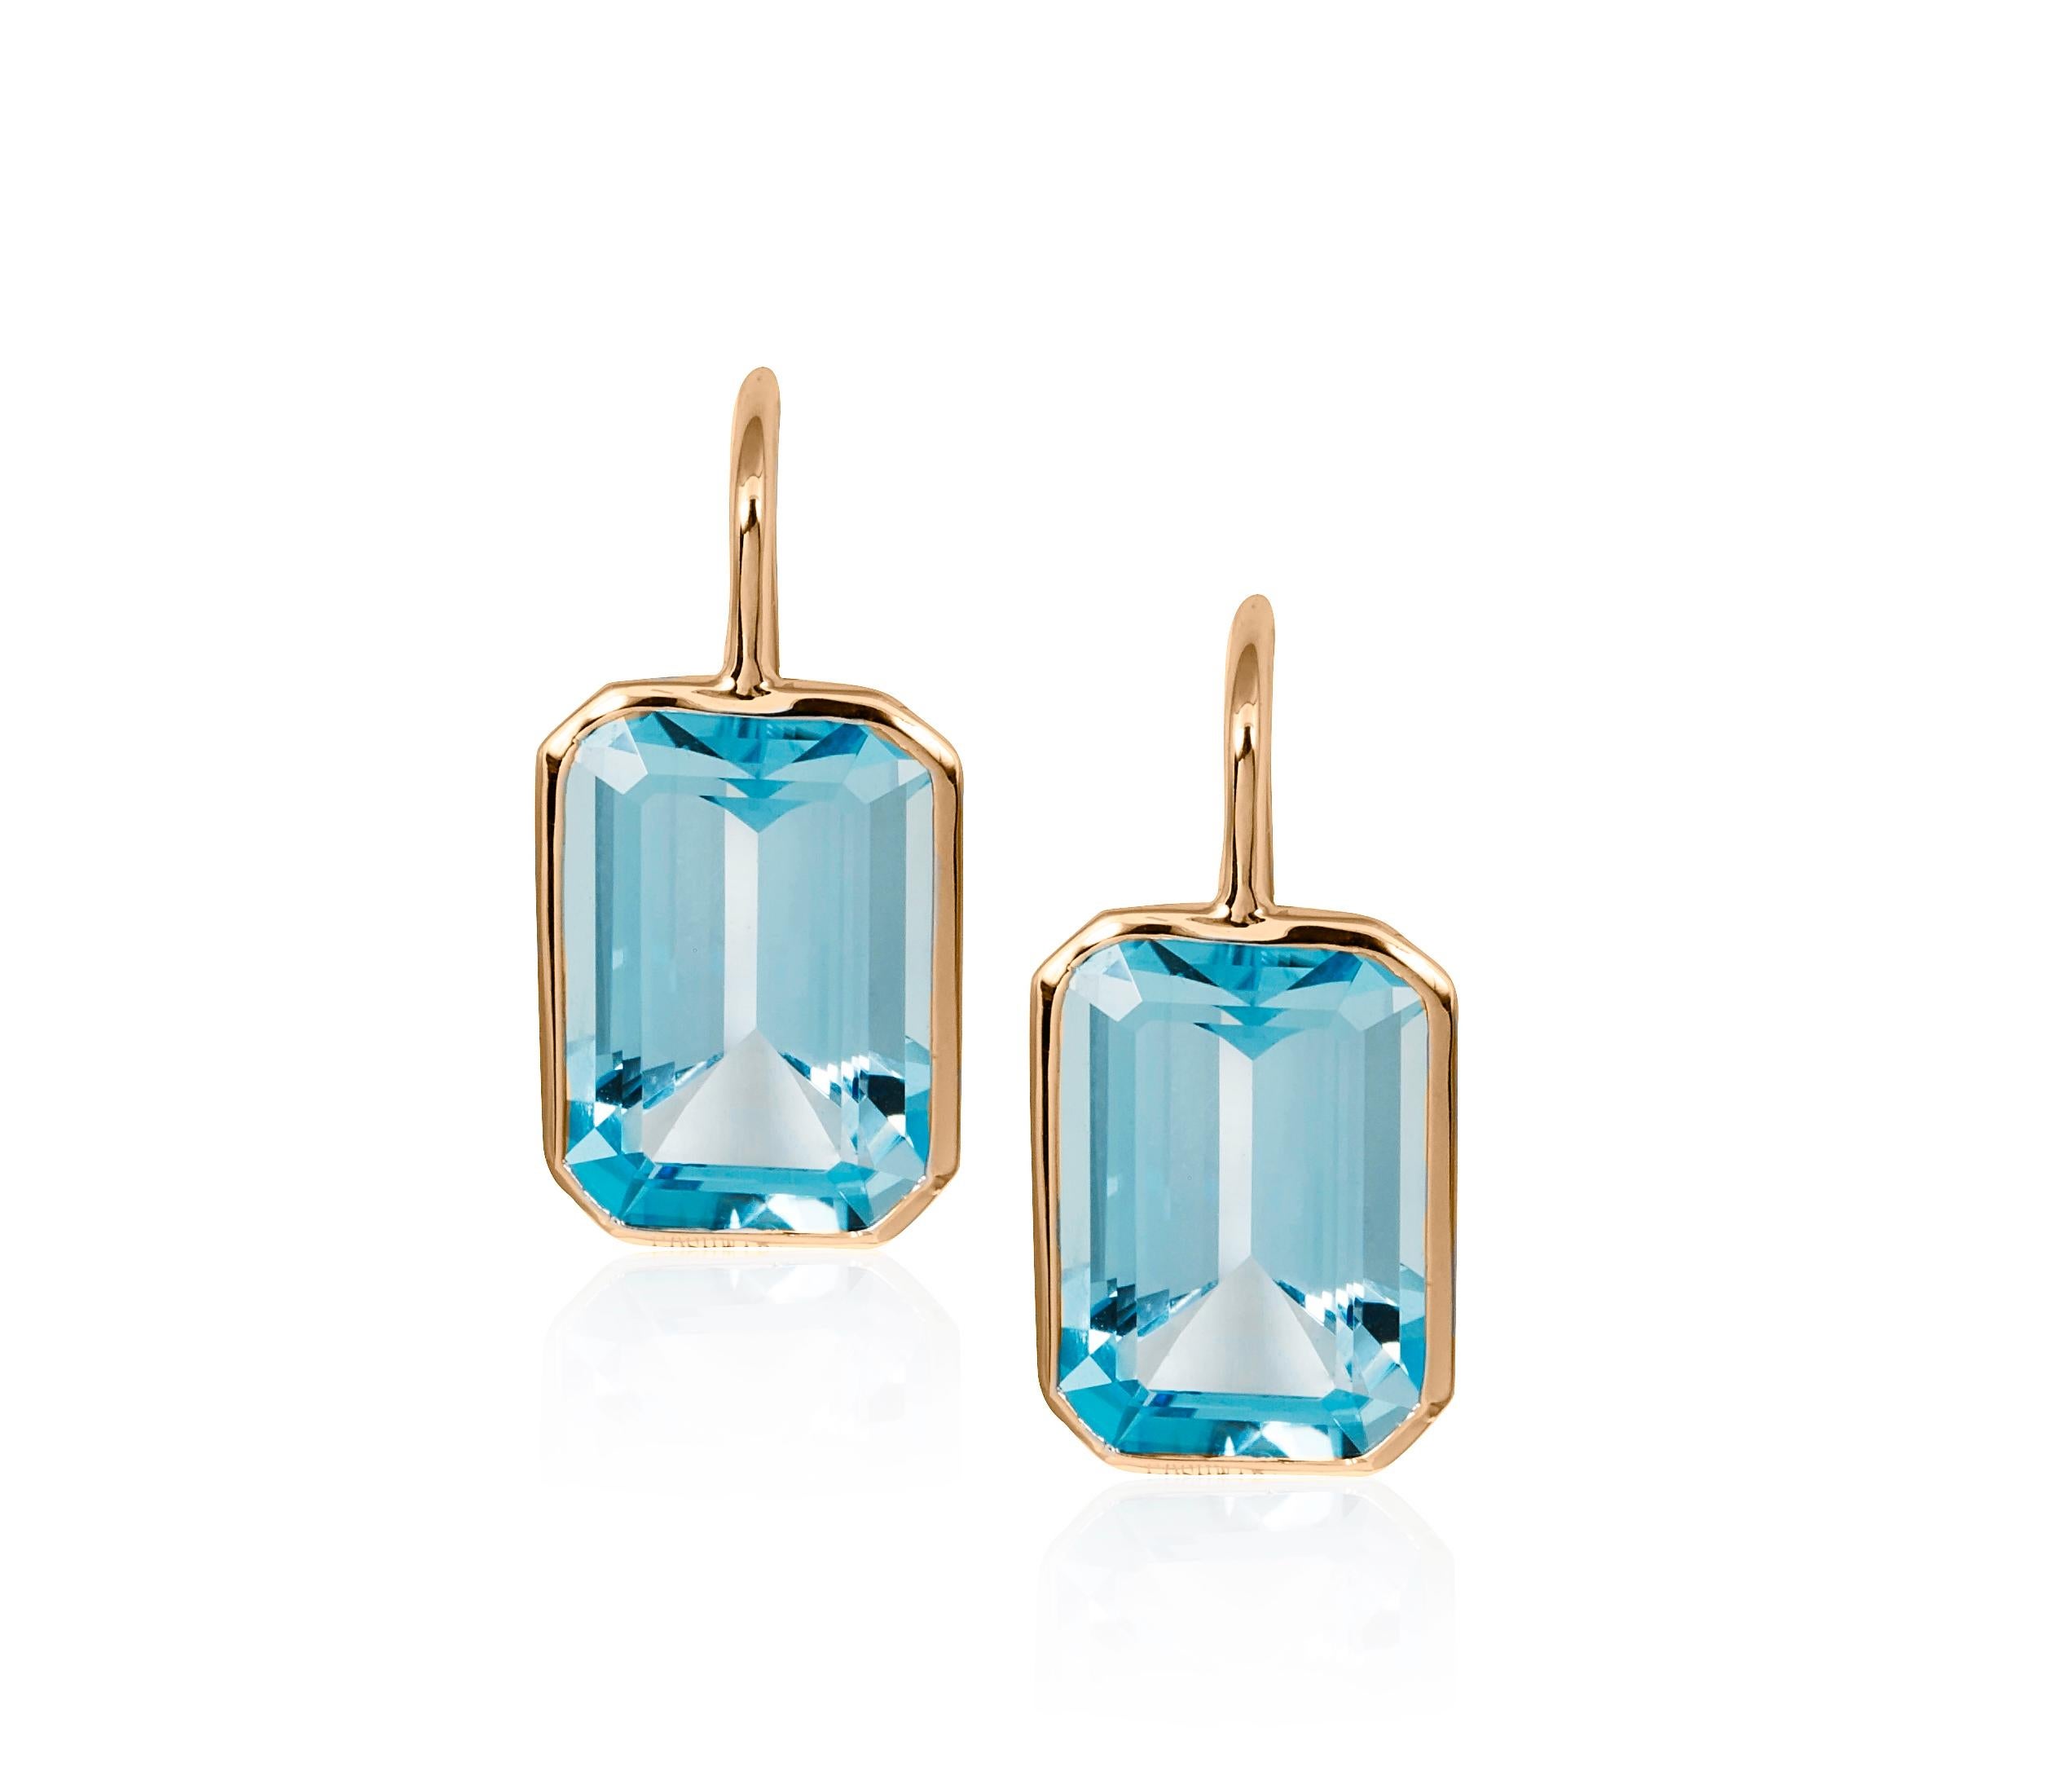 Blue Topaz Emerald Cut Earrings on Wire in 18K Yellow Gold Gold from 'Gossip' Collection

Stone Size: 15 x 10 mm